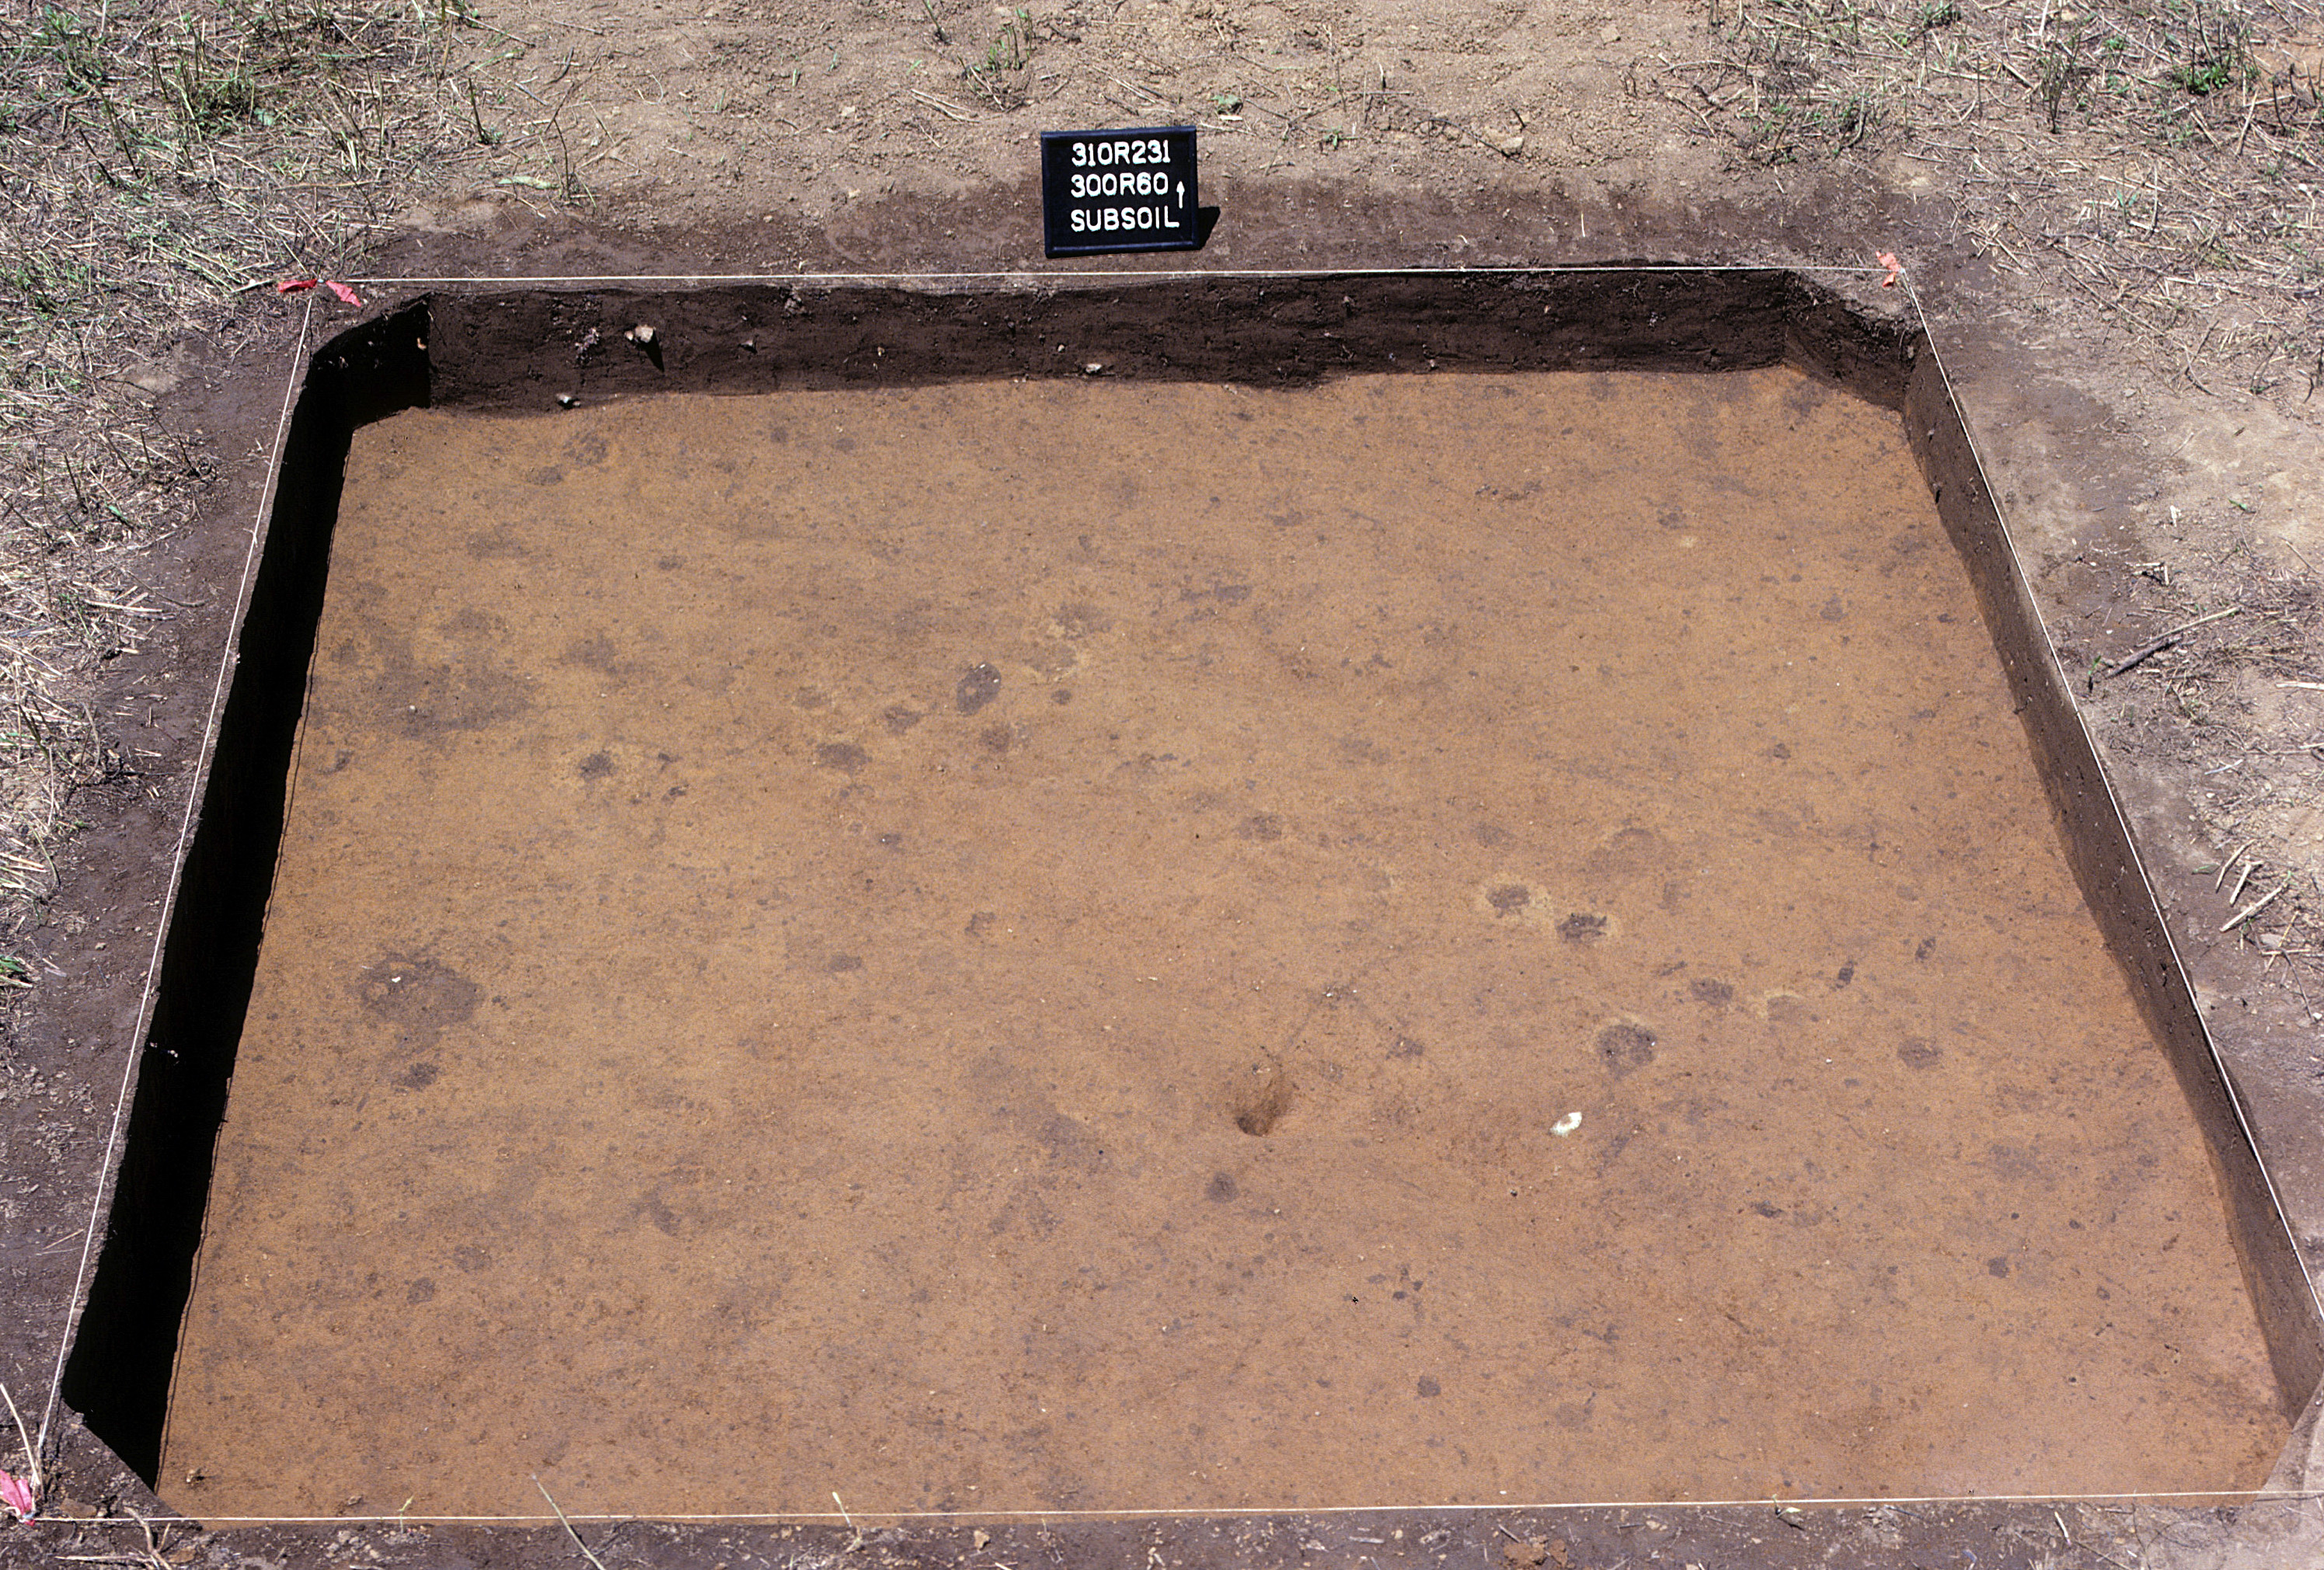 Figure 1003. Sq. 300R60 at top of subsoil (view to north).